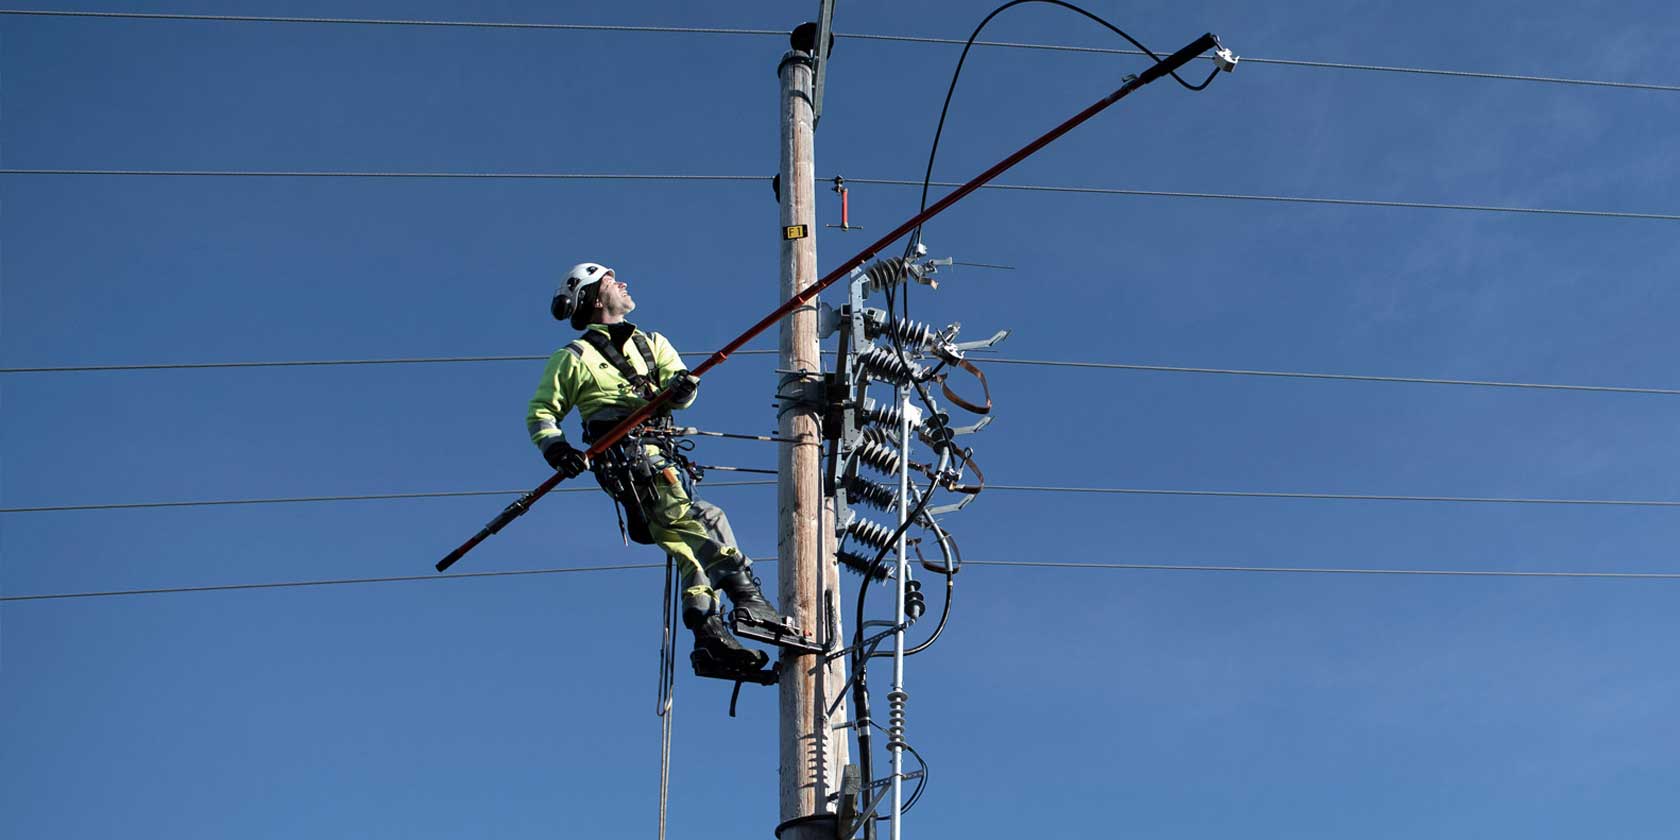 Employee in safety gear working on top of electricity pylon